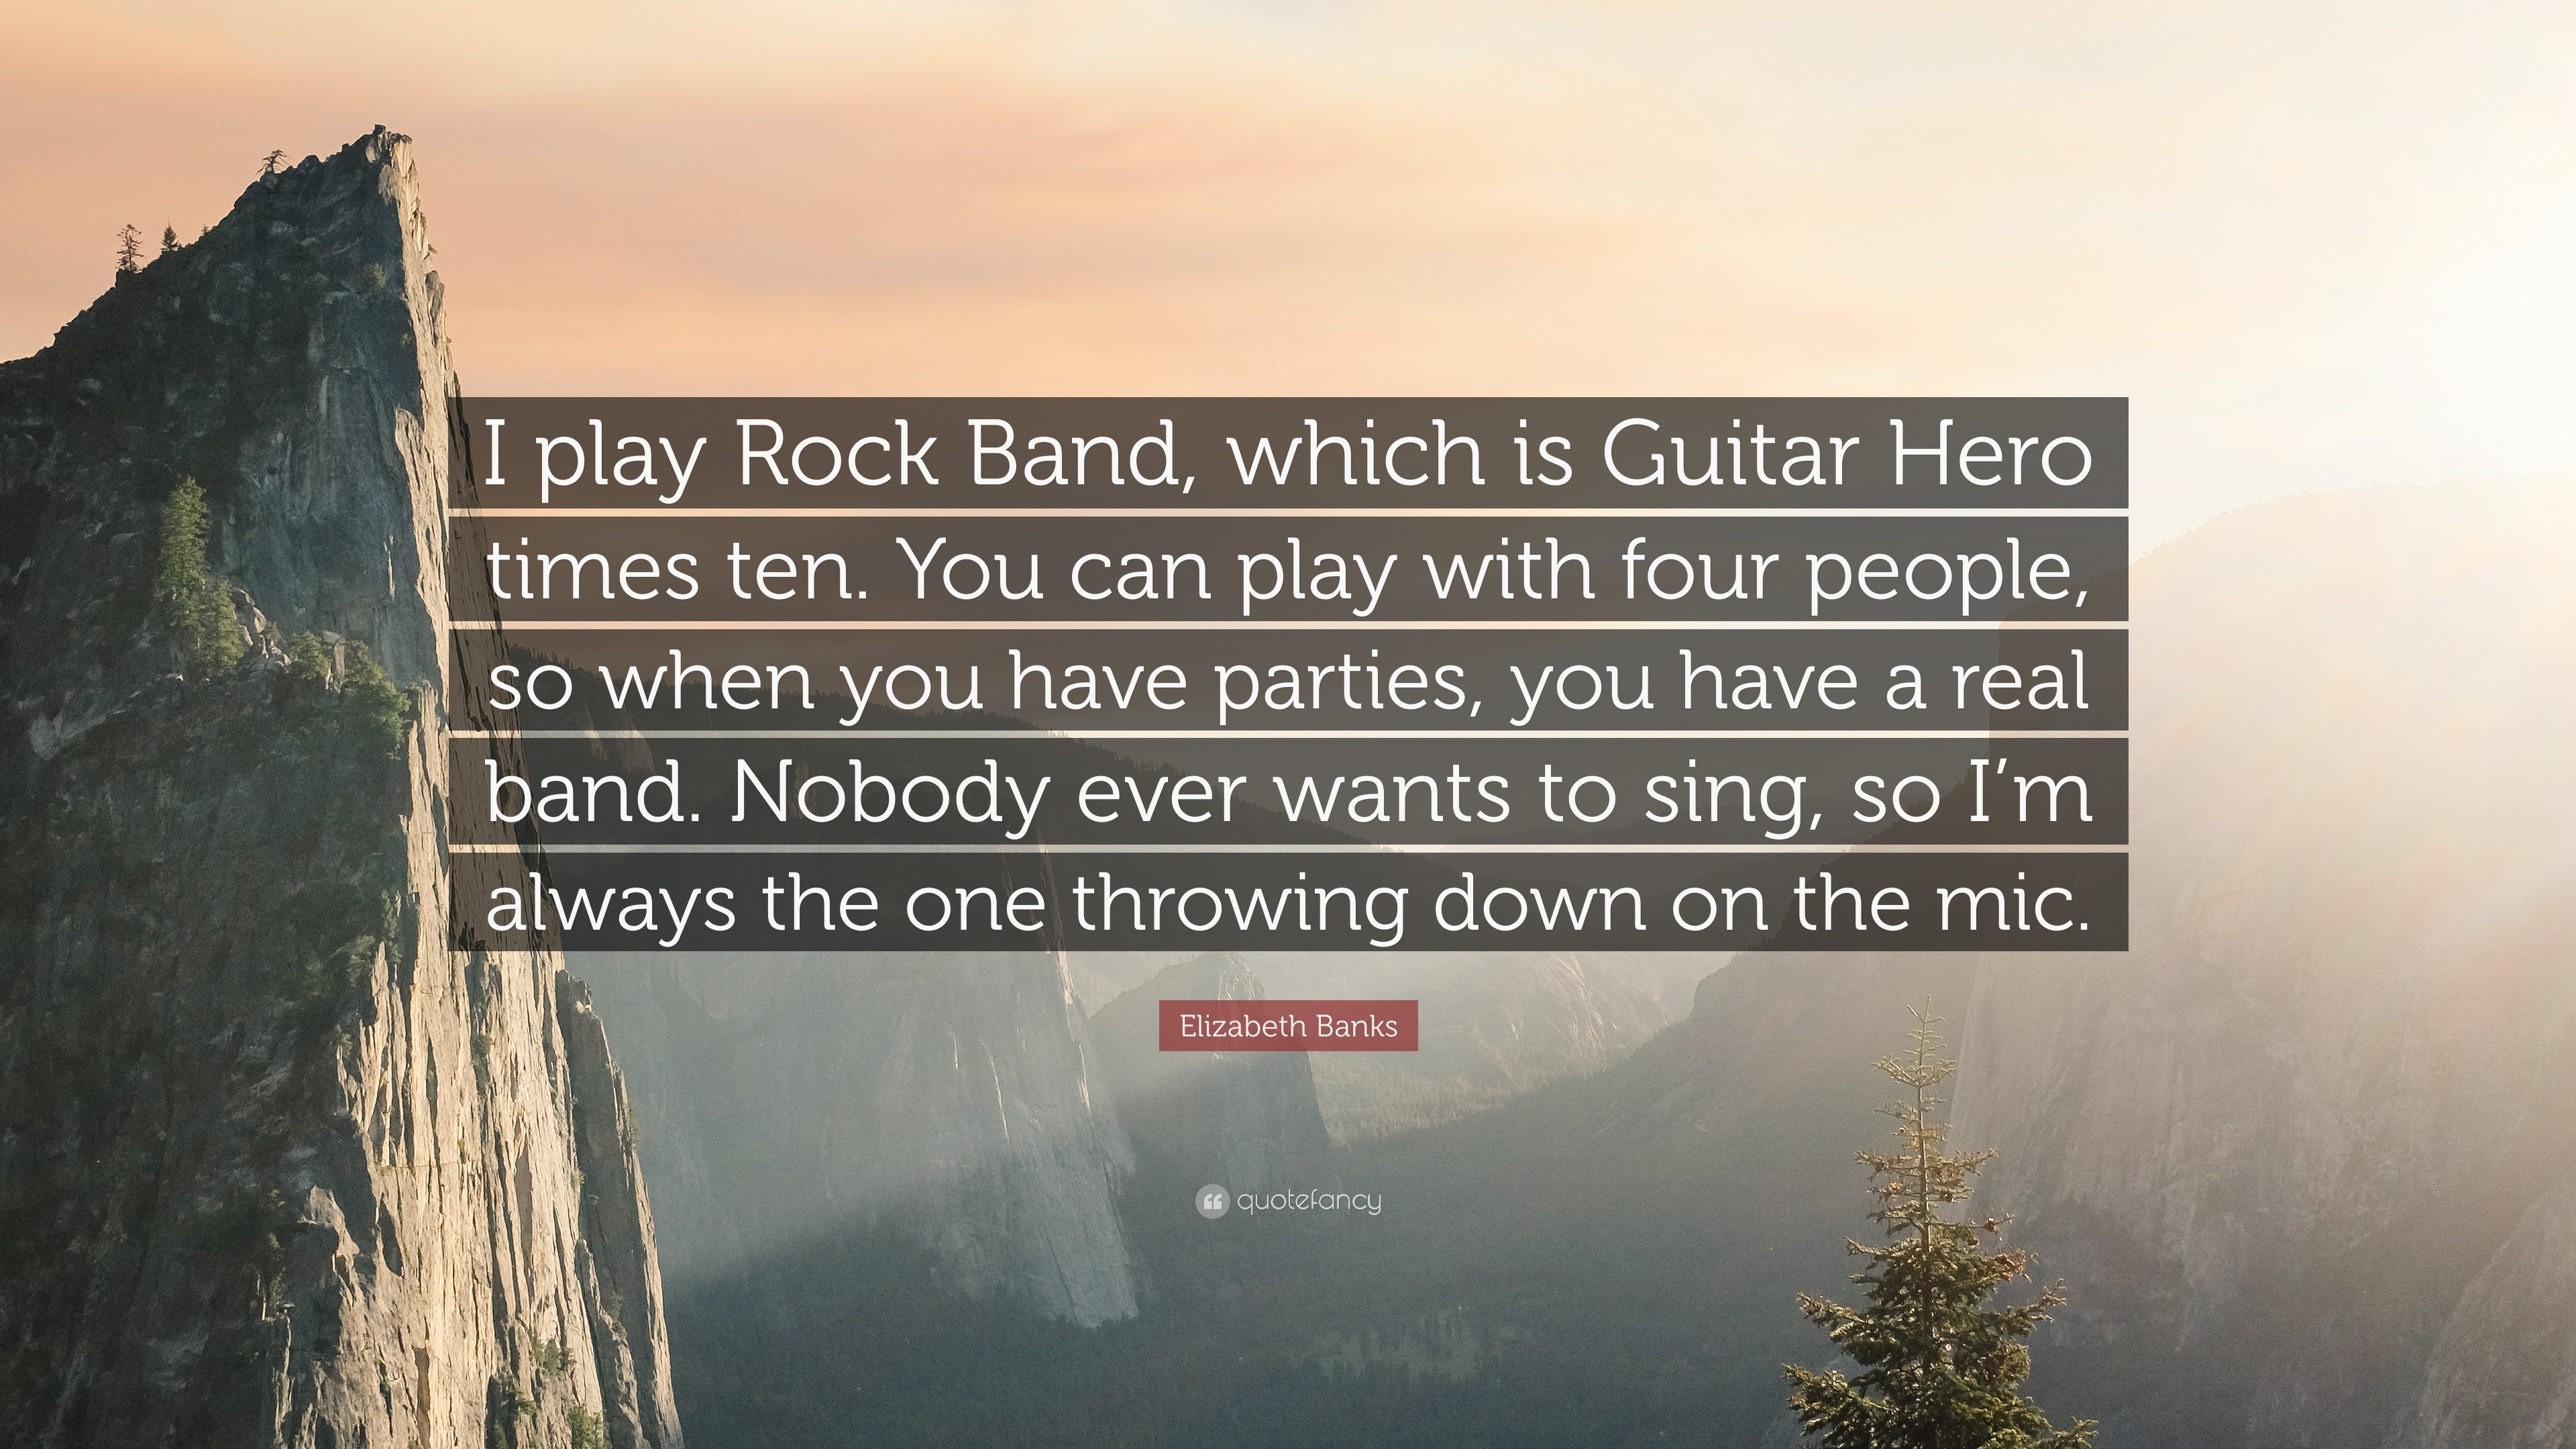 Elizabeth Banks quote: I play Rock Band, which is Guitar Hero